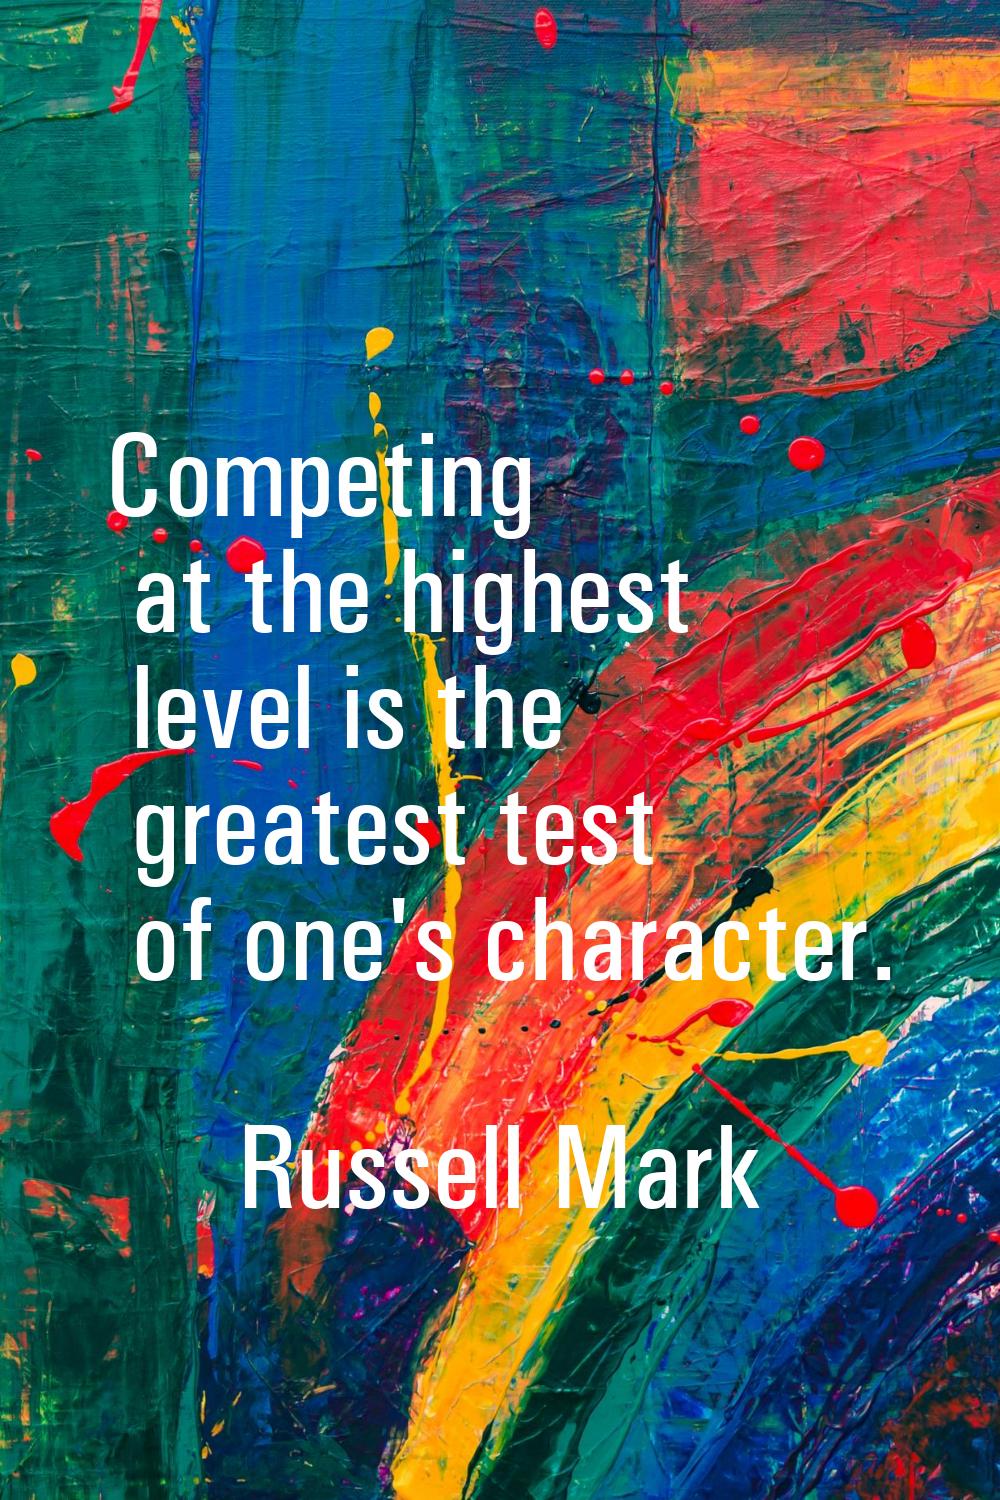 Competing at the highest level is the greatest test of one's character.